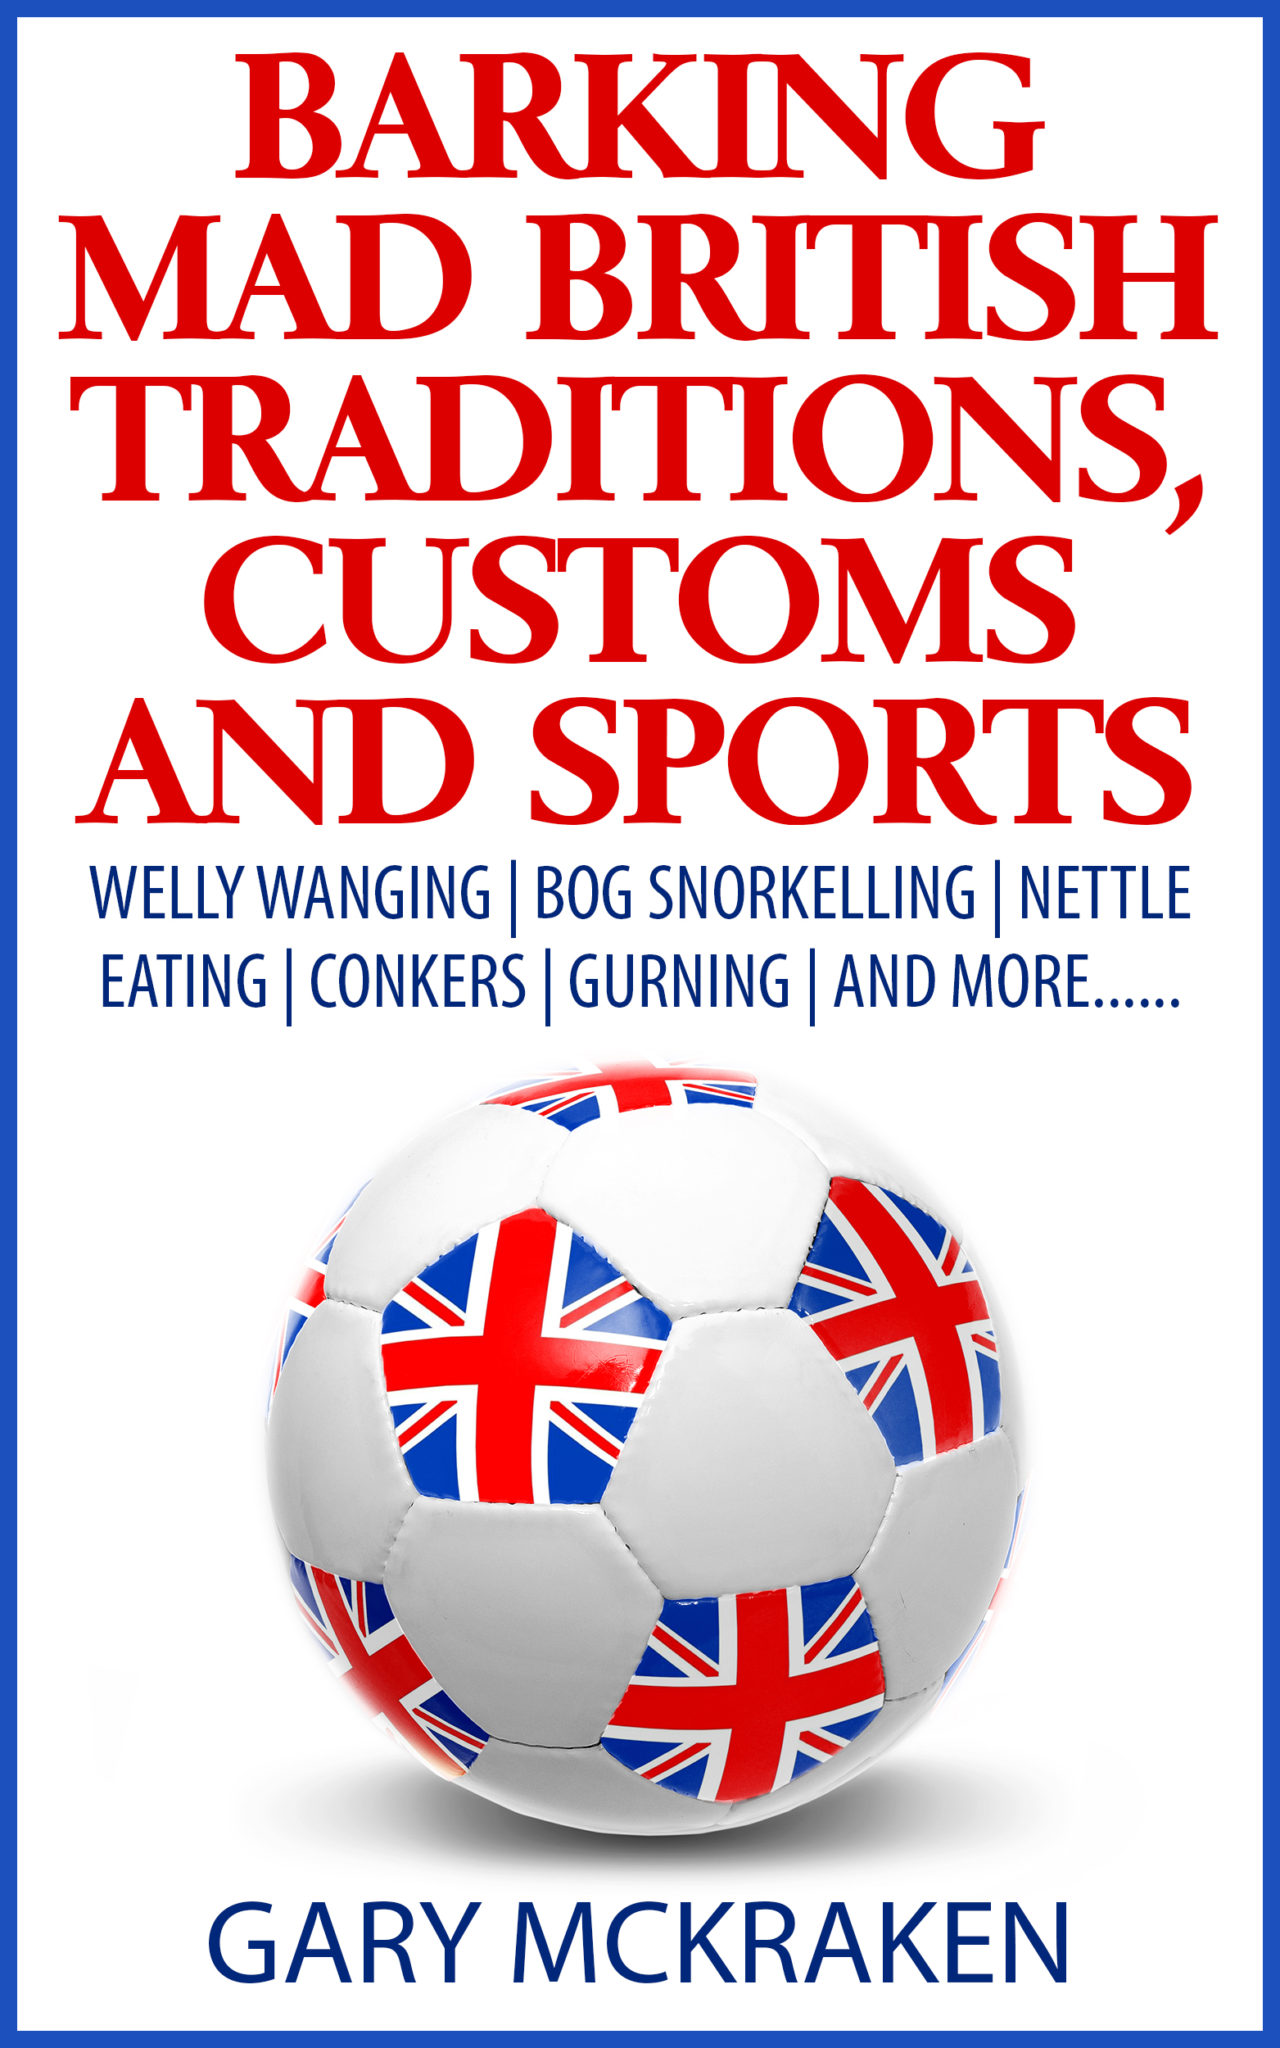 FREE: Barking Mad British Traditions, Customs and Sports by g